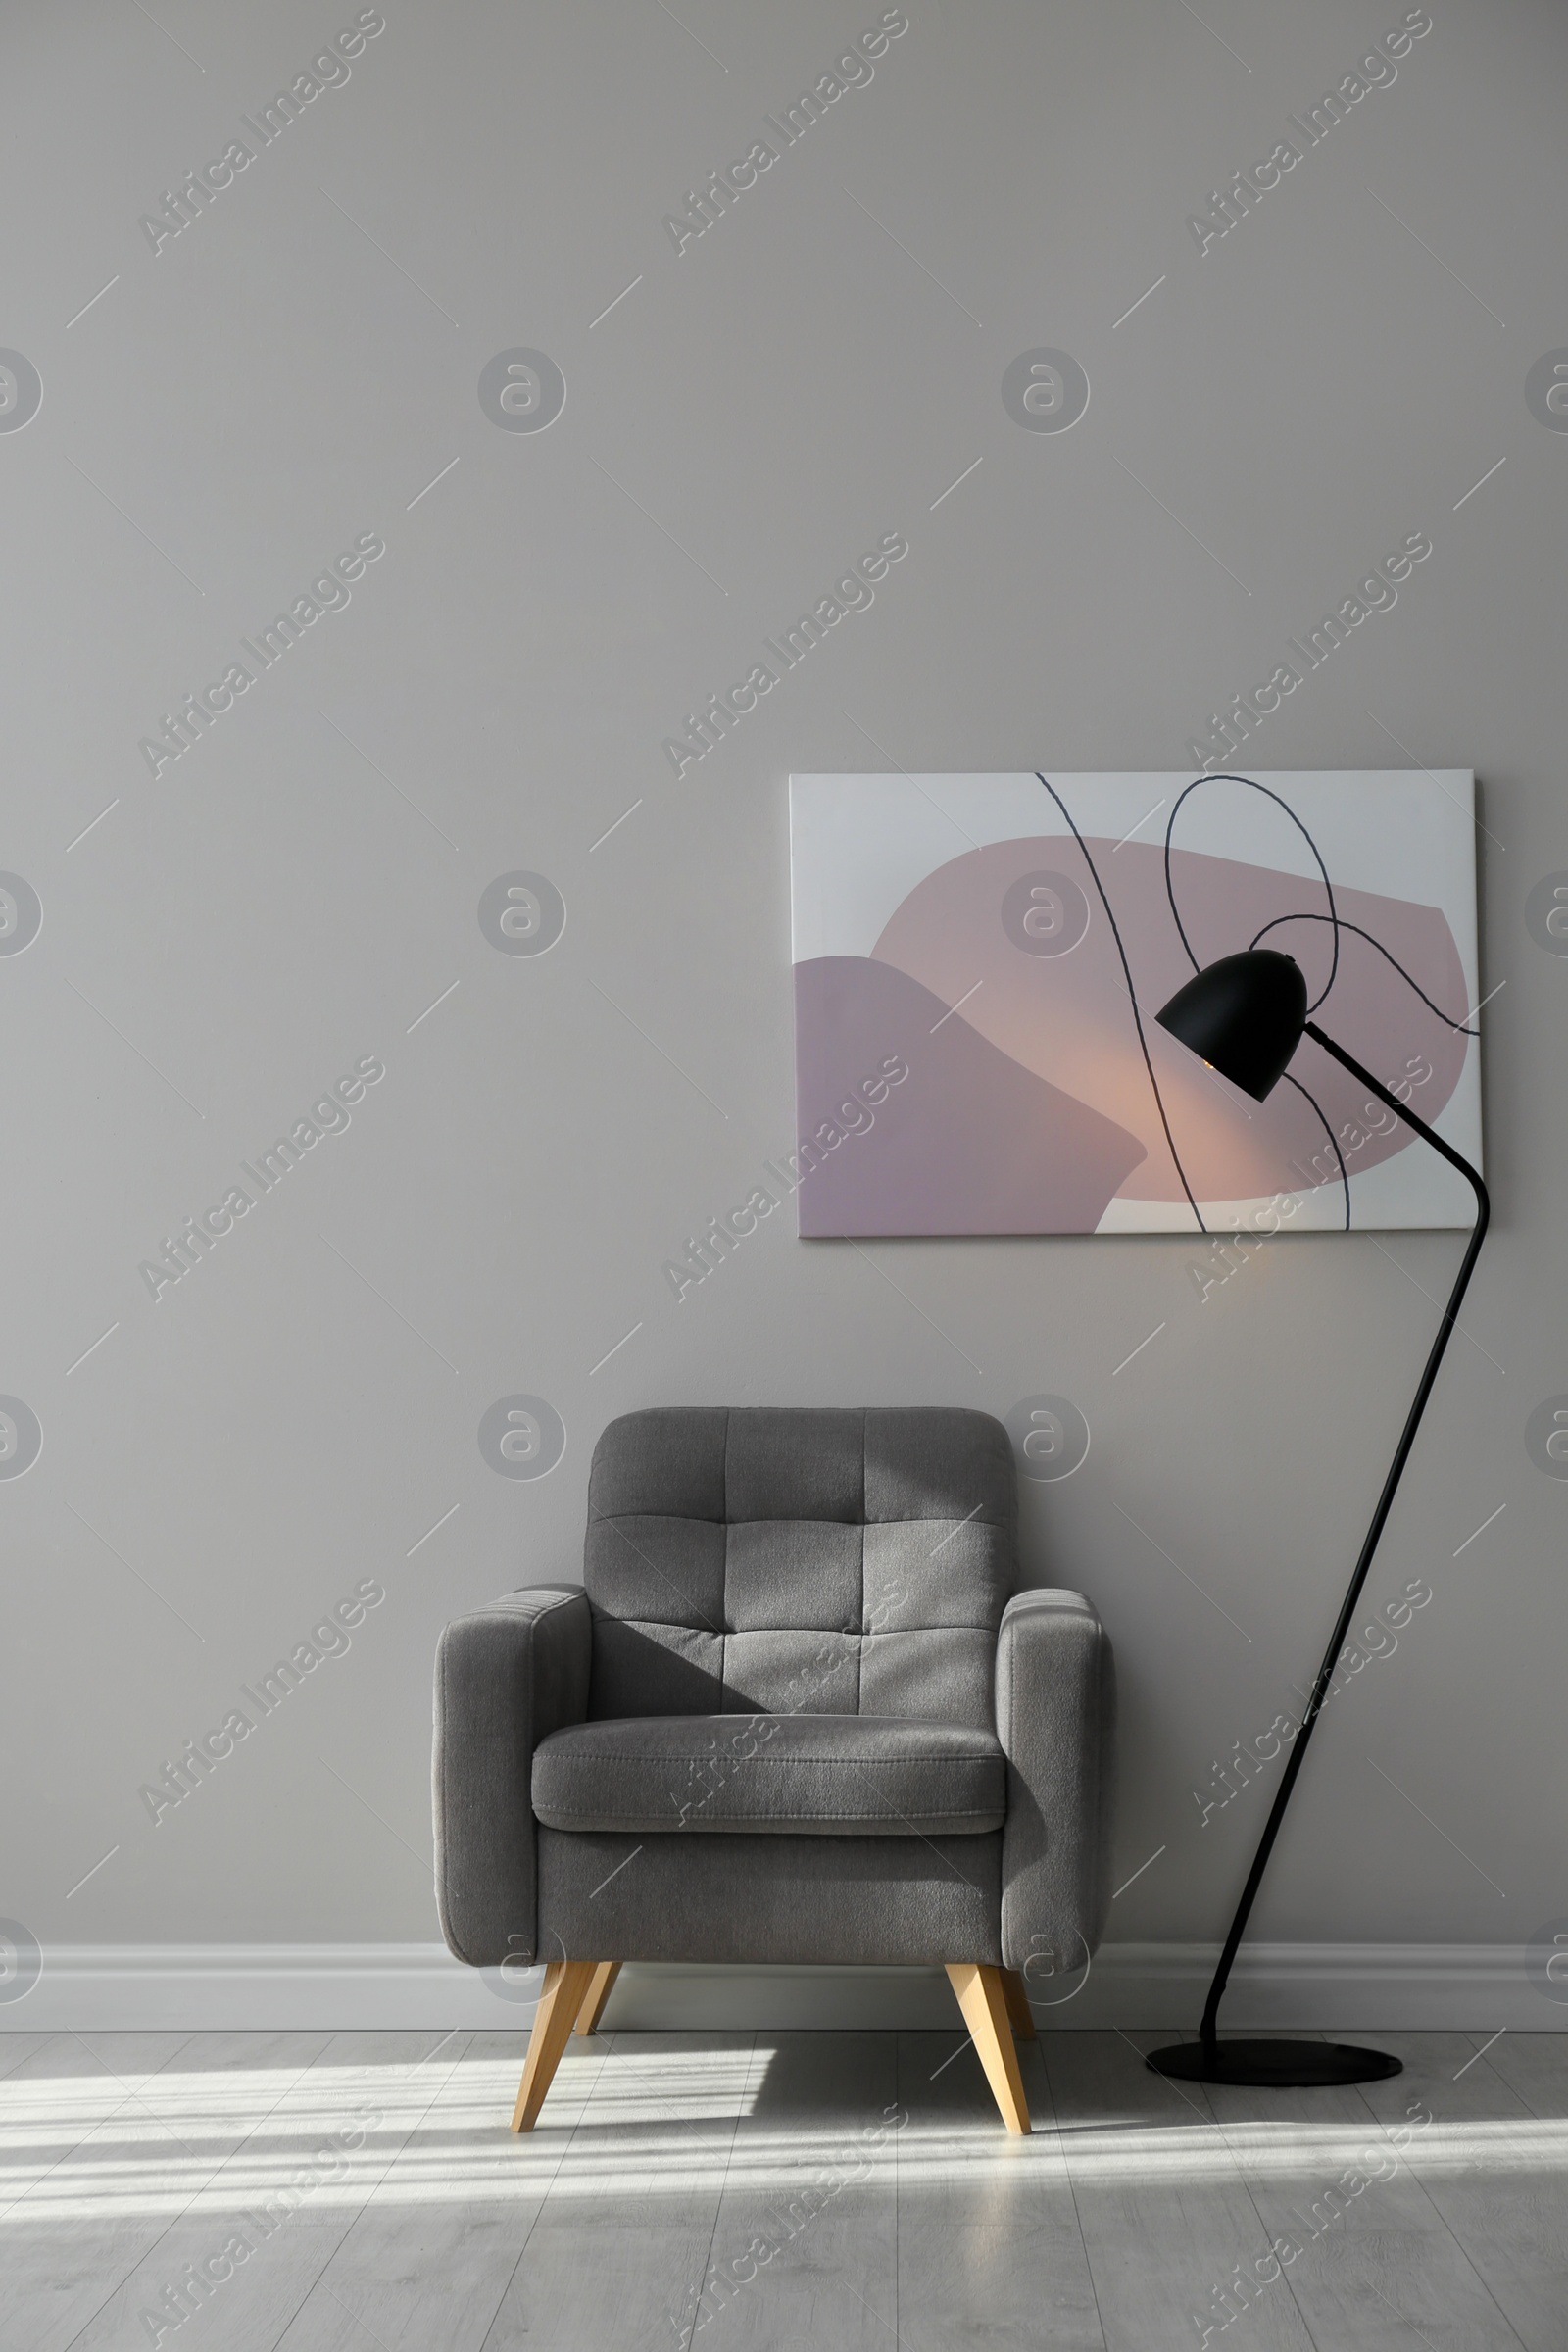 Photo of Stylish armchair and lamp near grey wall with beautiful picture. Interior design